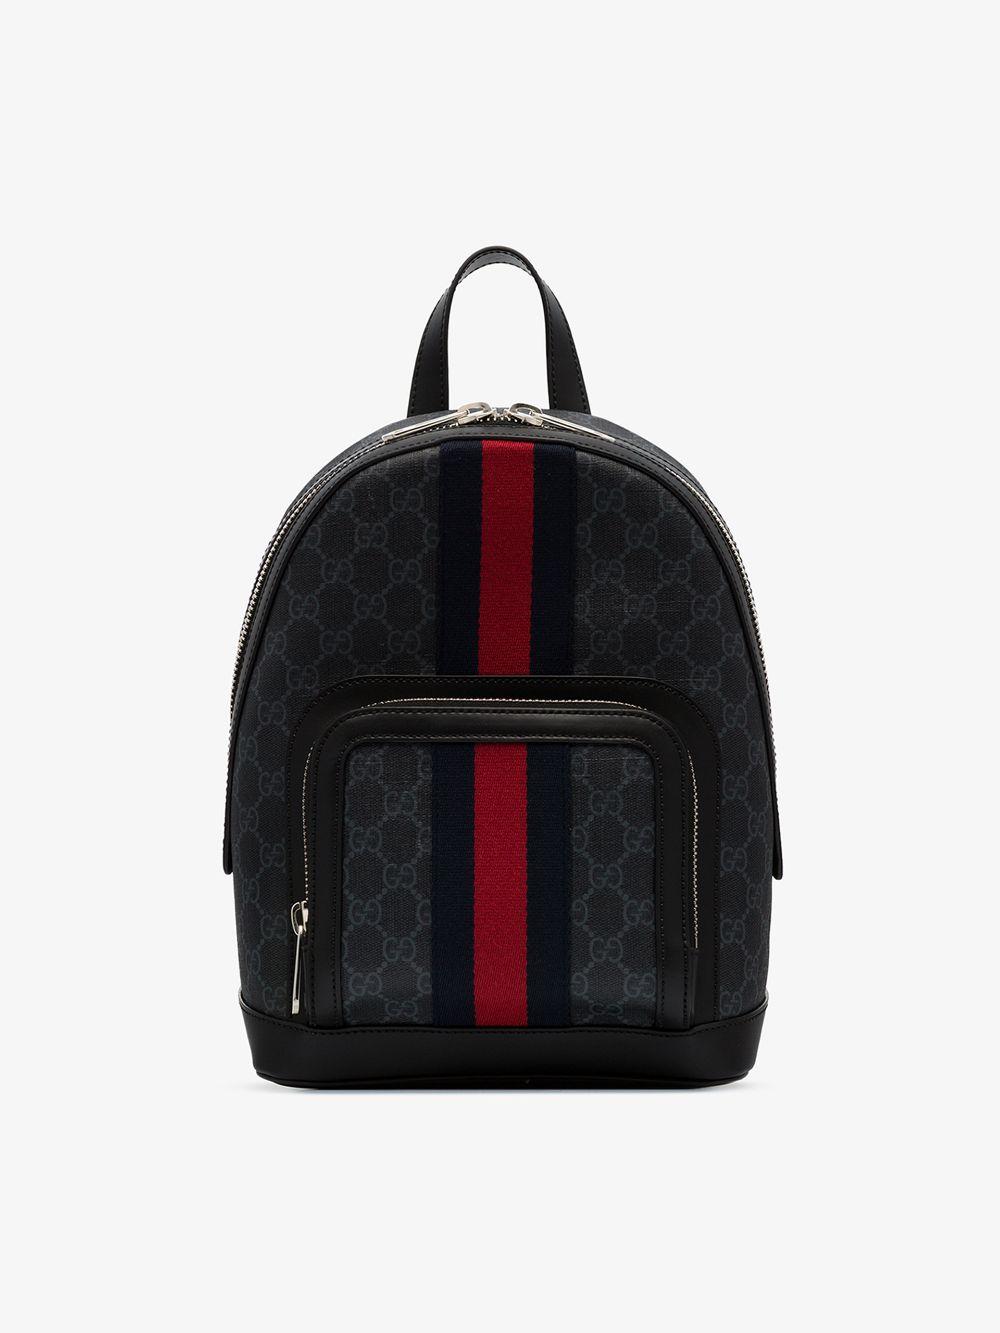 gucci backpack black with stripe